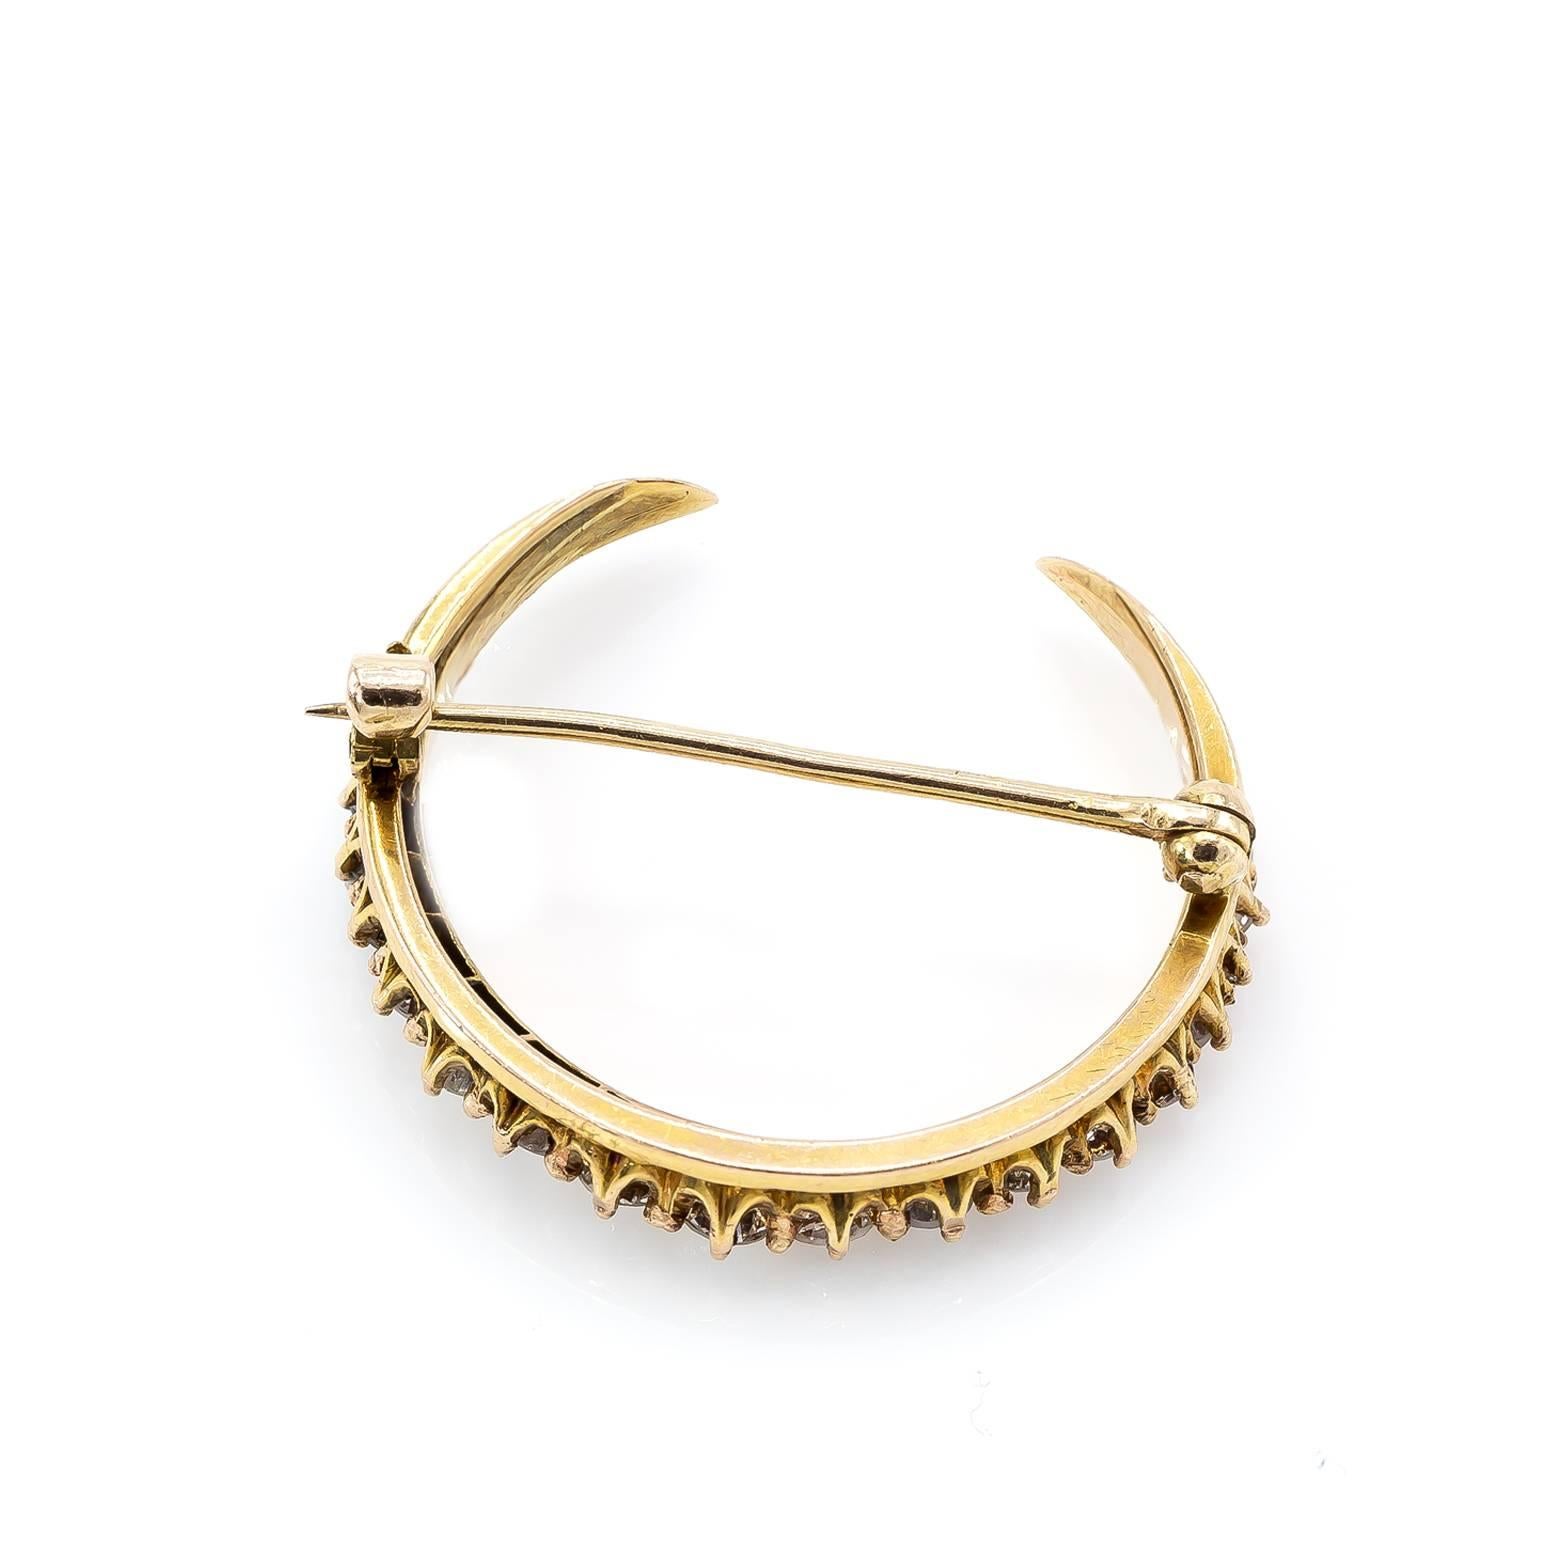 25 stunning brilliant diamonds dress up this 14K yellow gold crescent moon pin/brooch. Antique and Art Deco and absolutely gorgeous. 